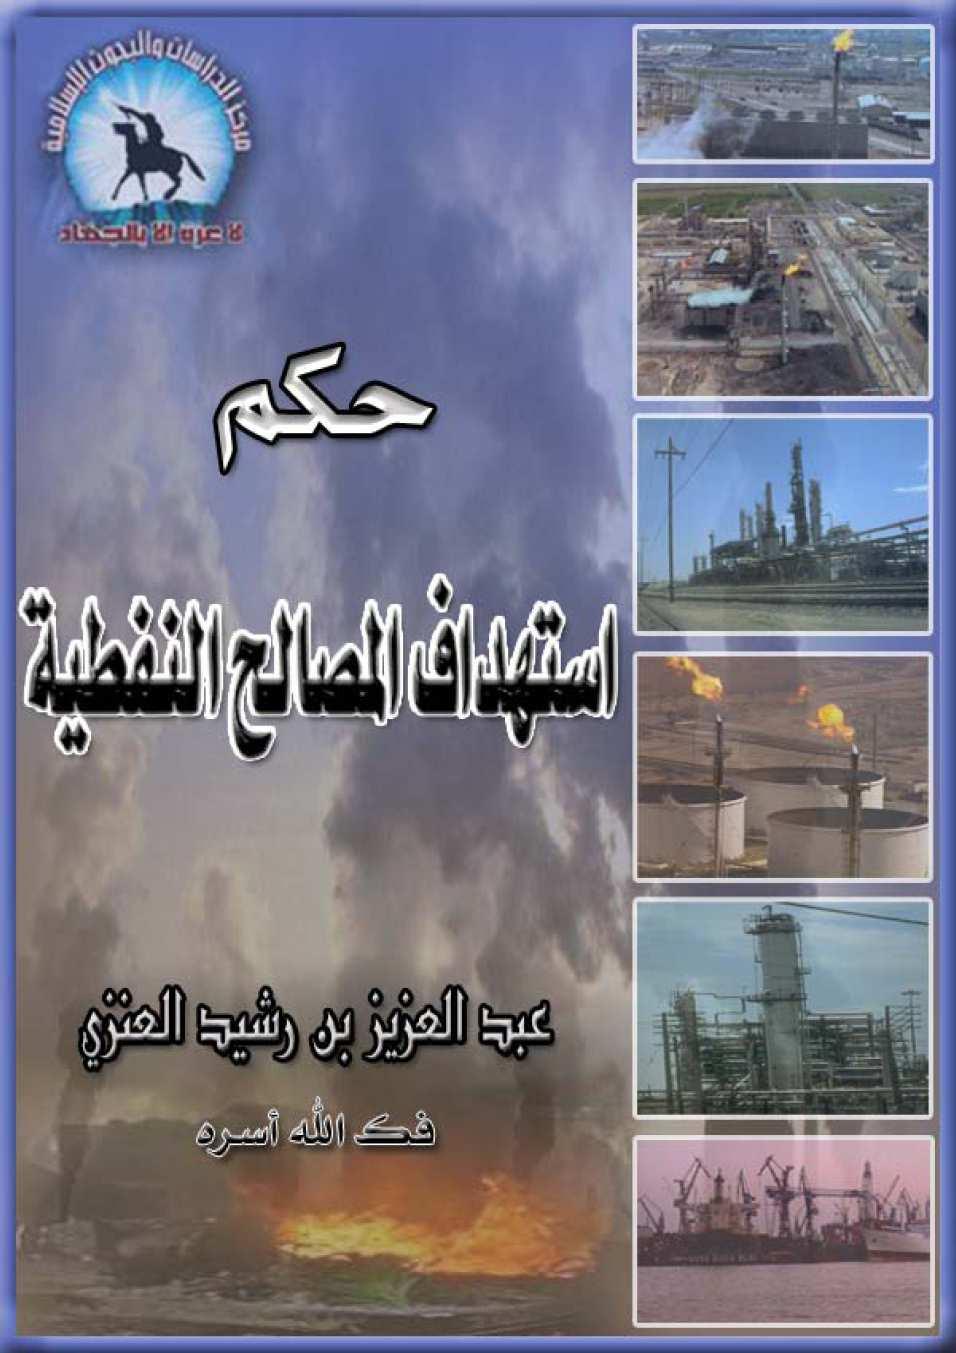 Al-Anzi, who is also known as Al-Qaeda s Minister of Propaganda, apparently published the book on the internet in March 2004, where he wrote that the disruption of the oil supply is the best way to